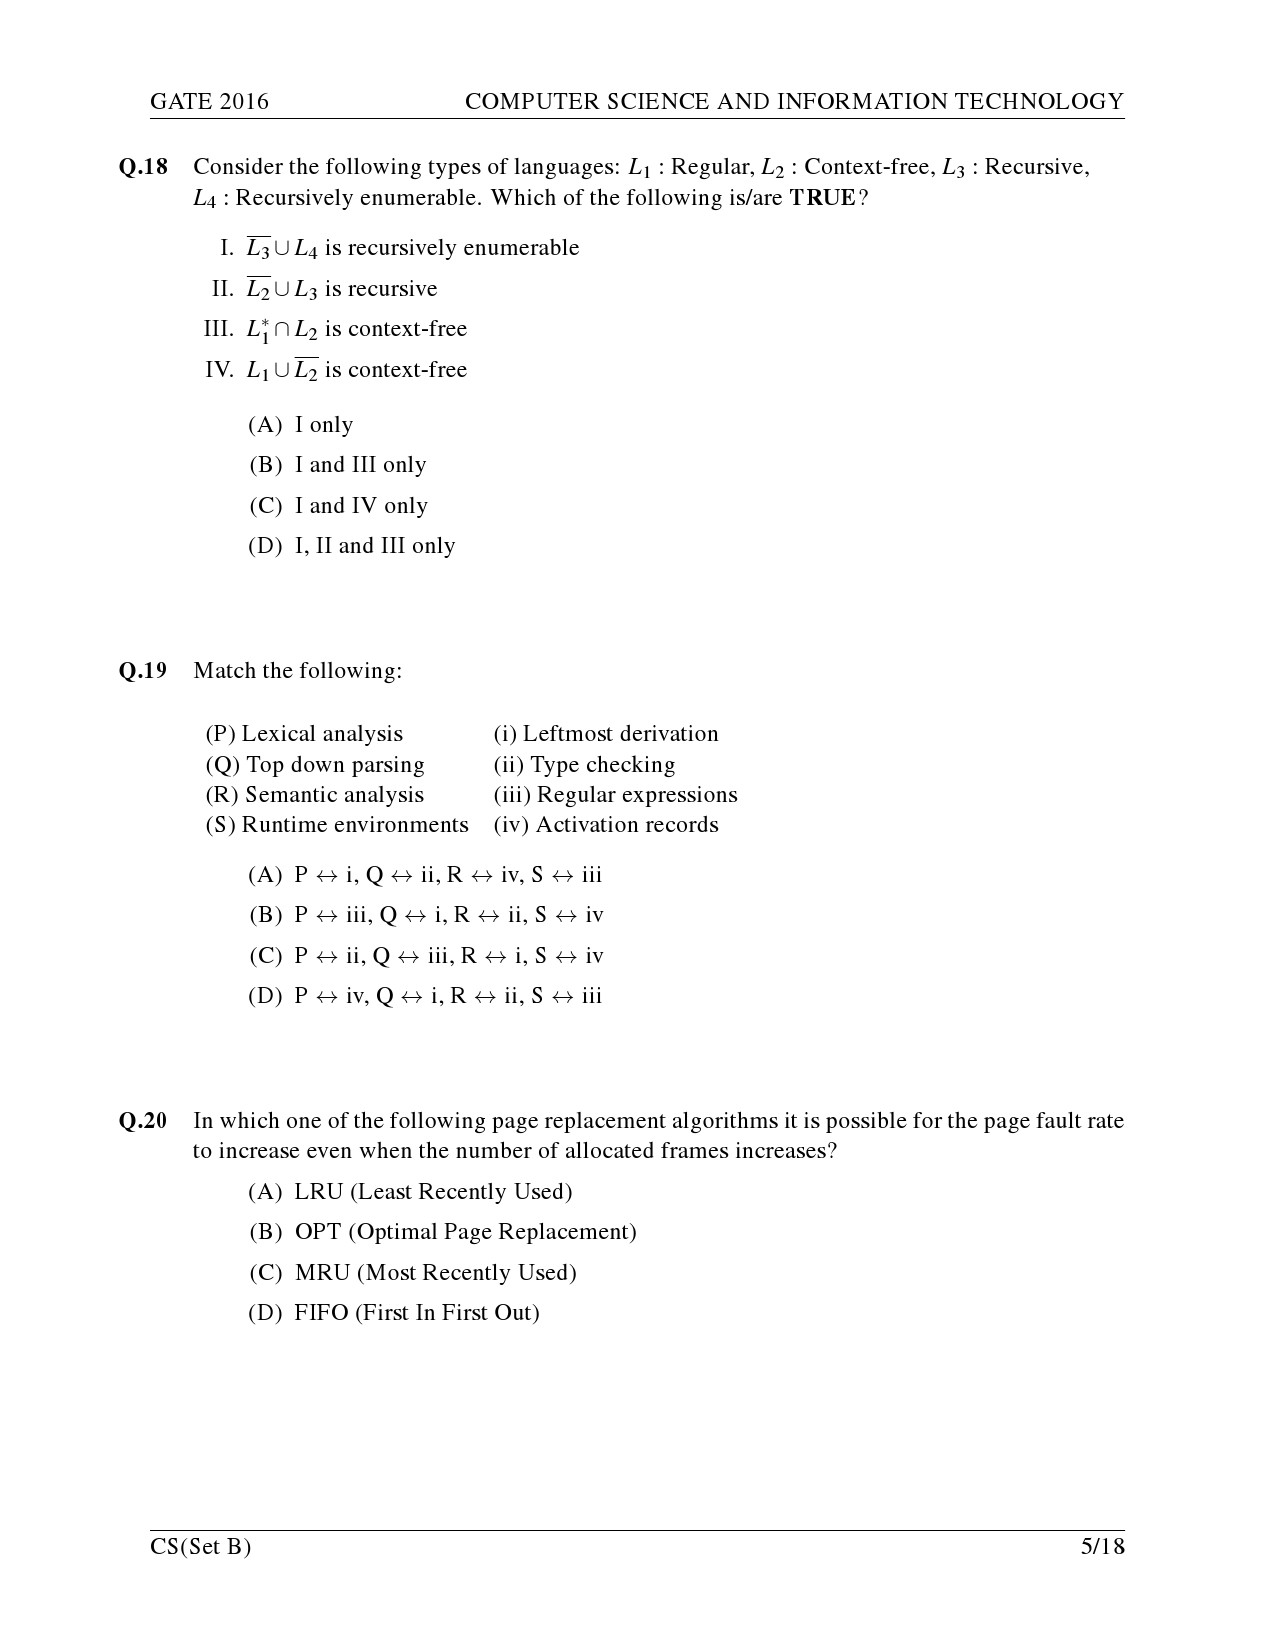 GATE Exam Question Paper 2016 Computer Science and Information Technology Set B 8